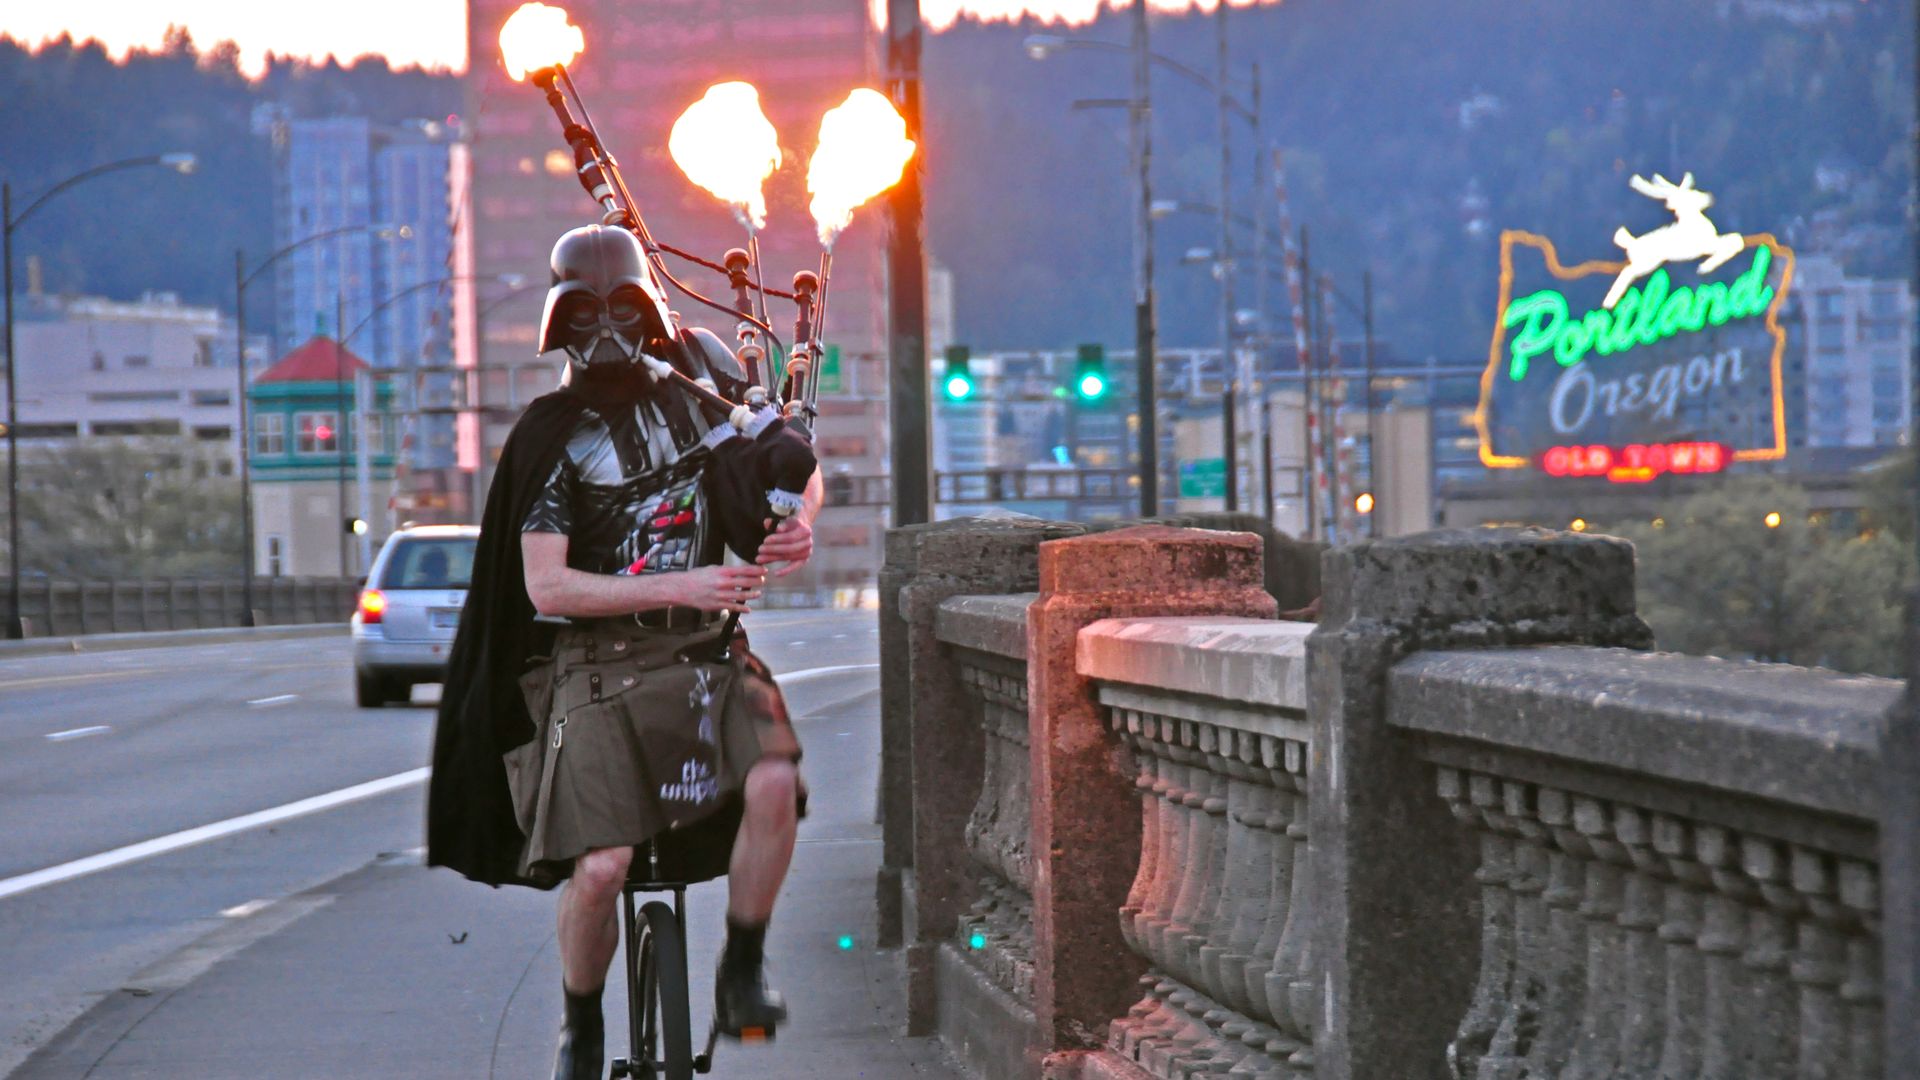 A man wearing a black Darth Vader mask and playing bagpipes with flames coming out of them unicycles across a bridge with a neon sign reading Portland, Oregon in the background.